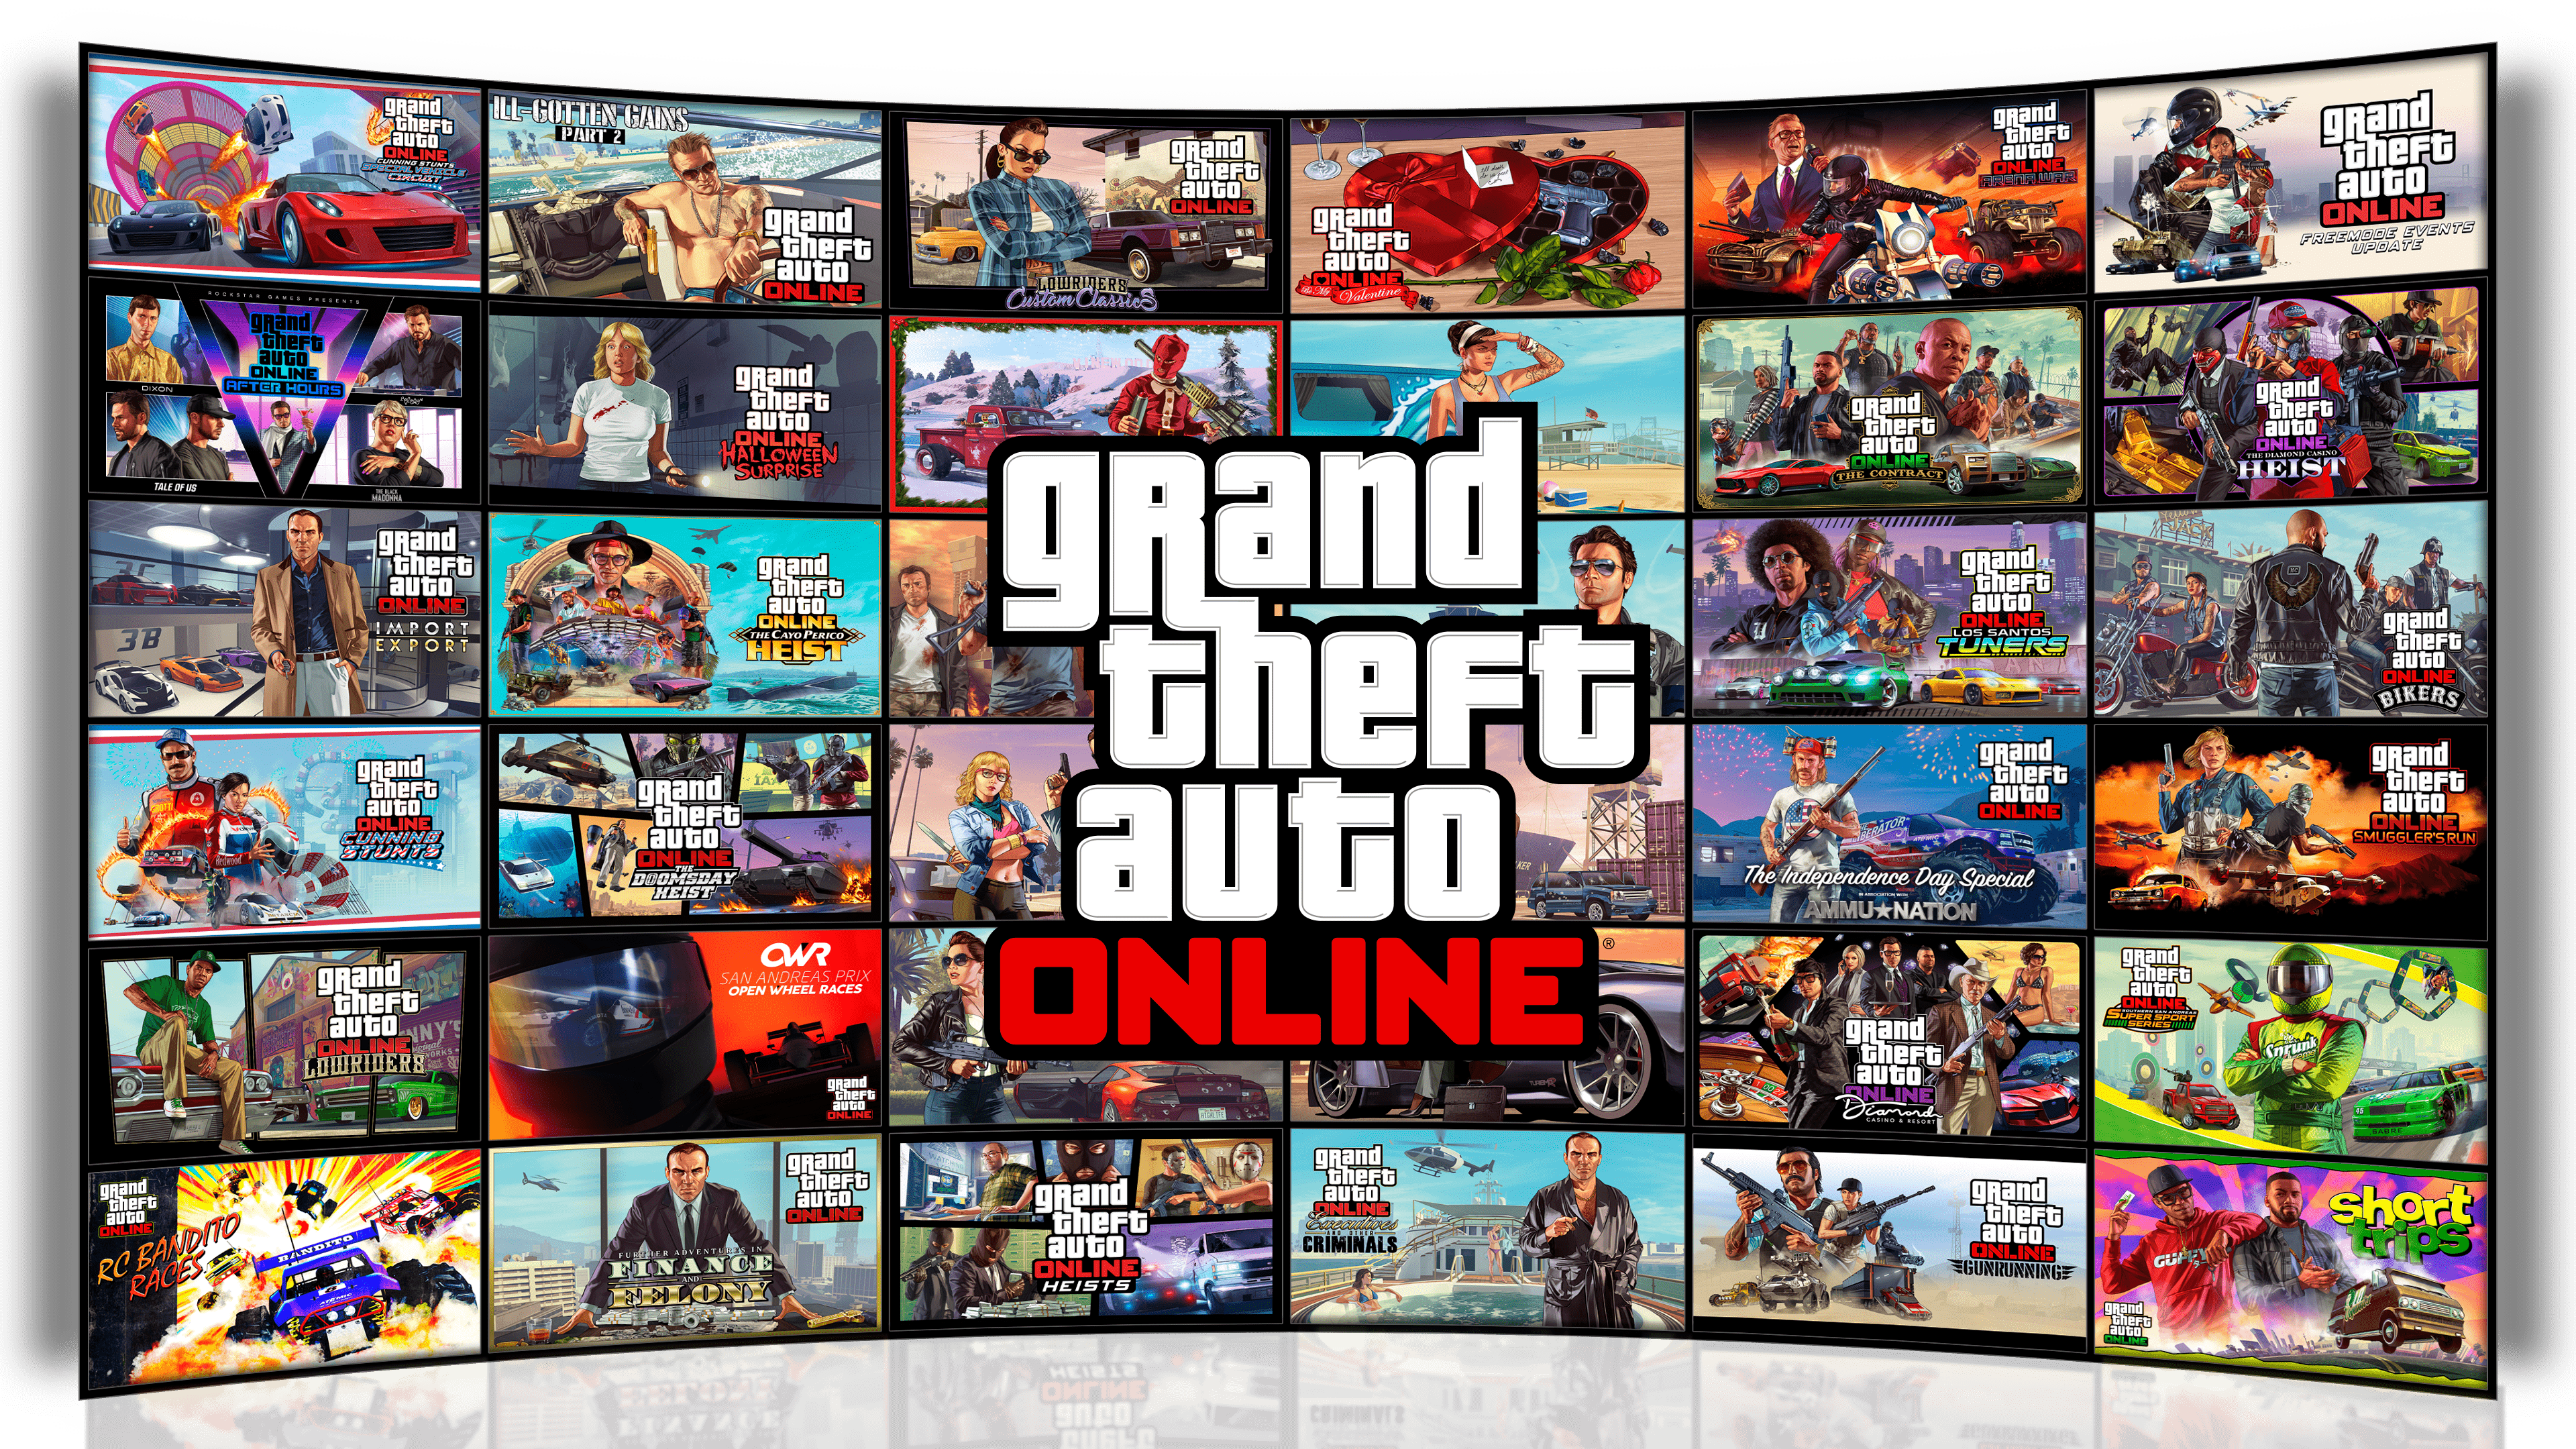 Download Now GTA 5 Update 1.09 on PS4 & Xbox One, Patch 1.23 on PS3 and Xbox  360